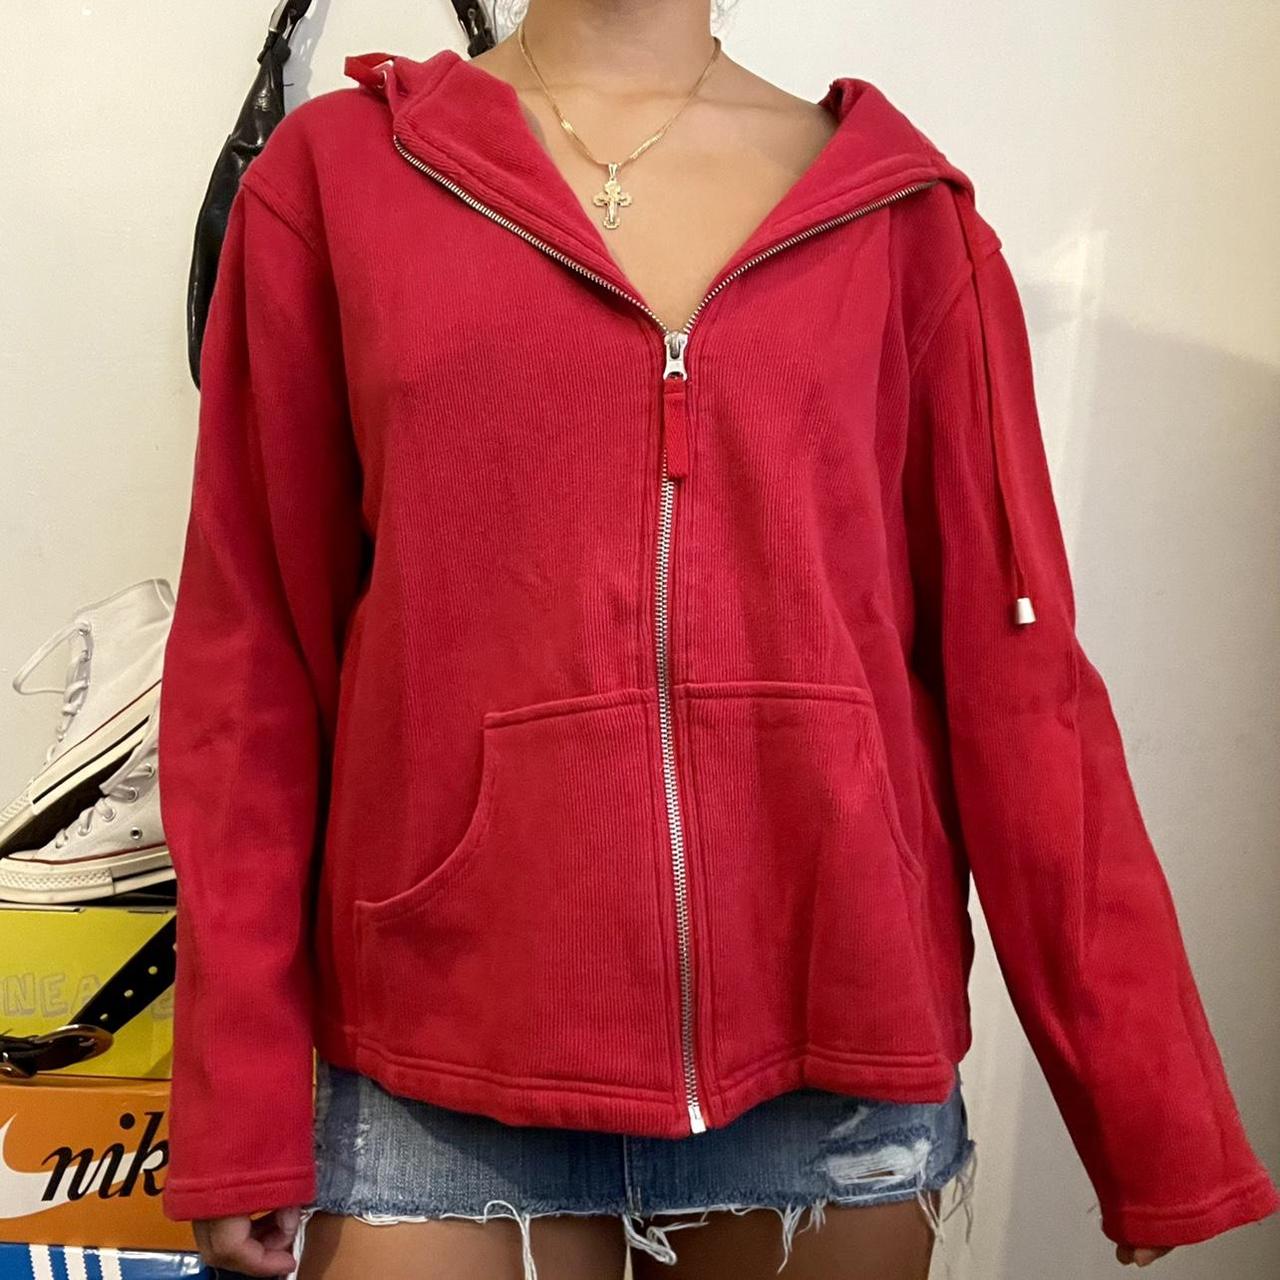 Basic Editions Women's Red Jacket (2)